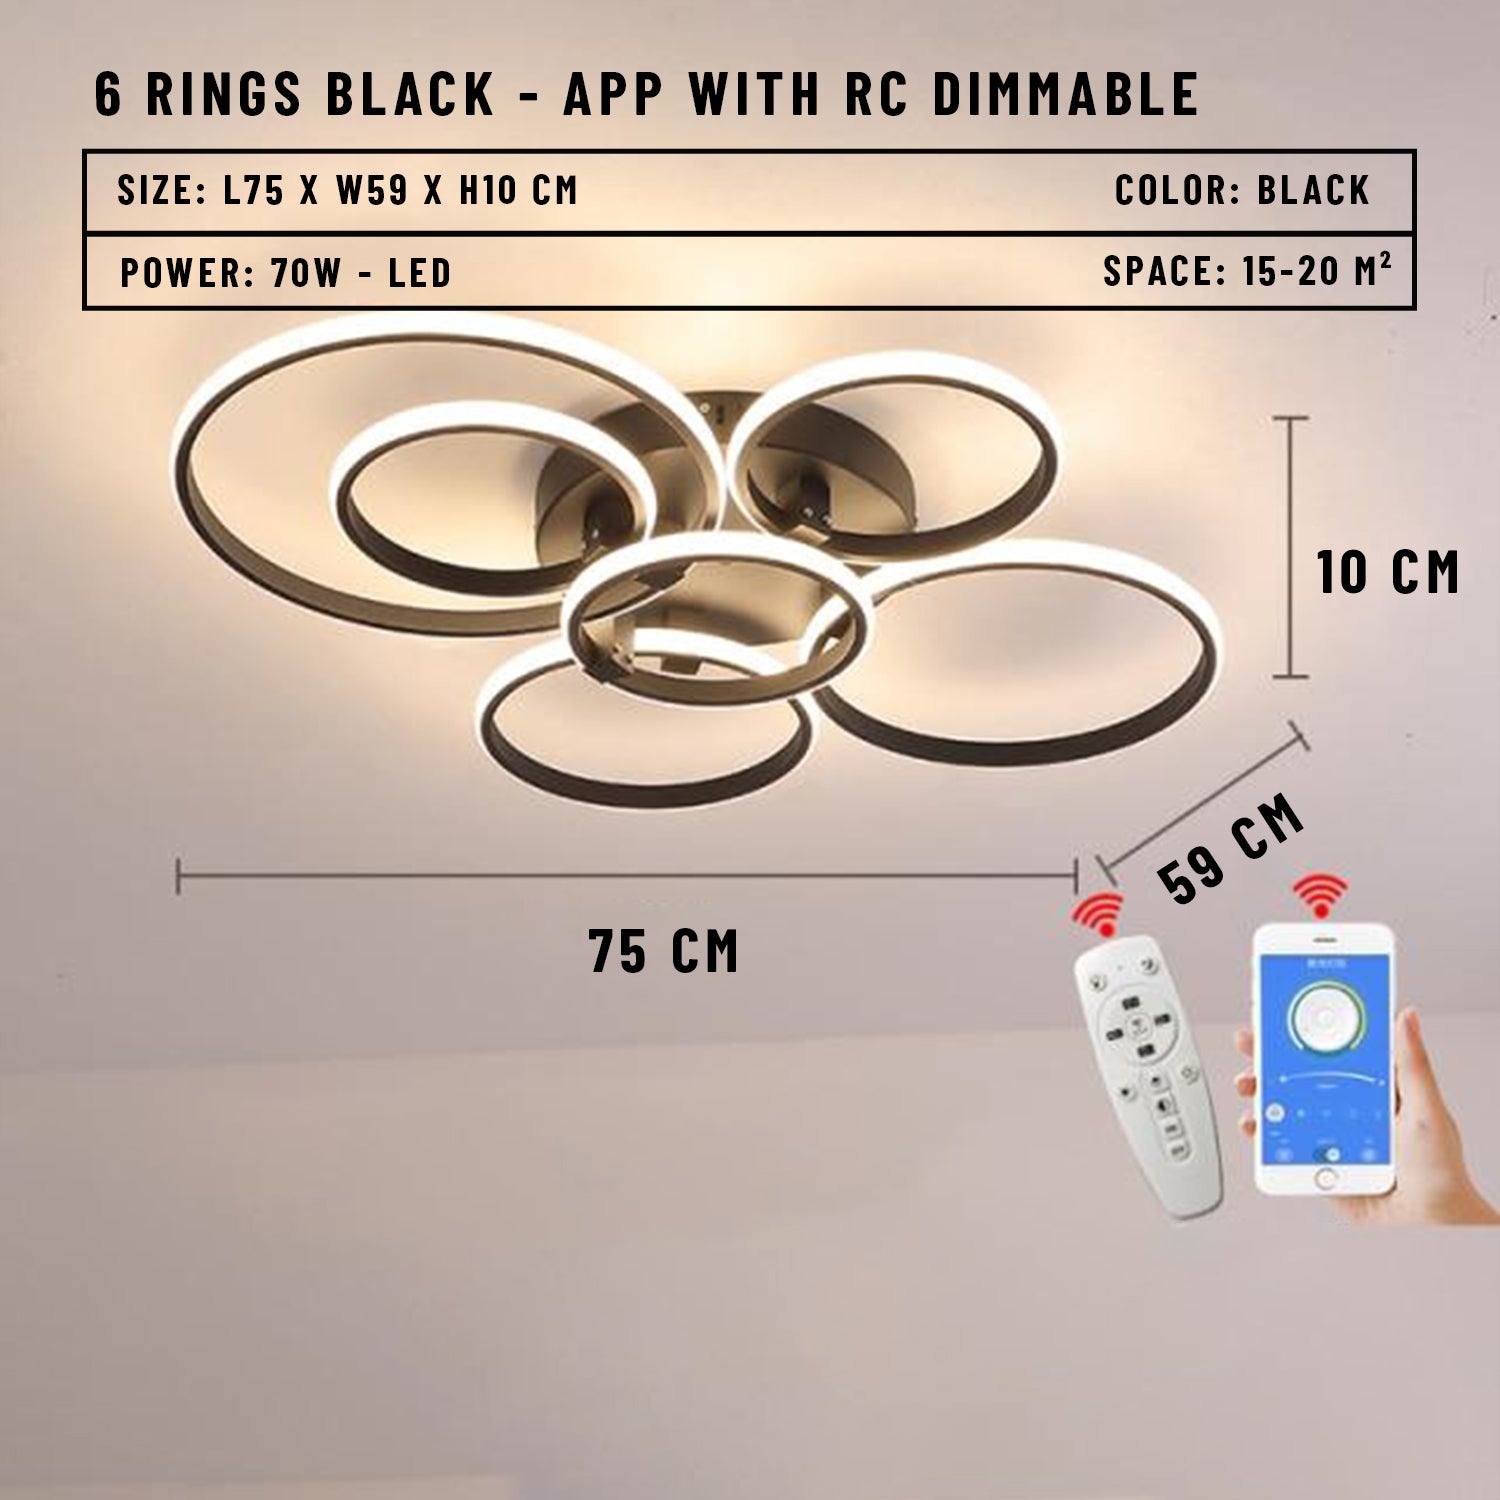 Blastric LED Dimmable Circle Rings Ceiling Light - 6 Rings Black / APP With RC Dimmable - Level Decor